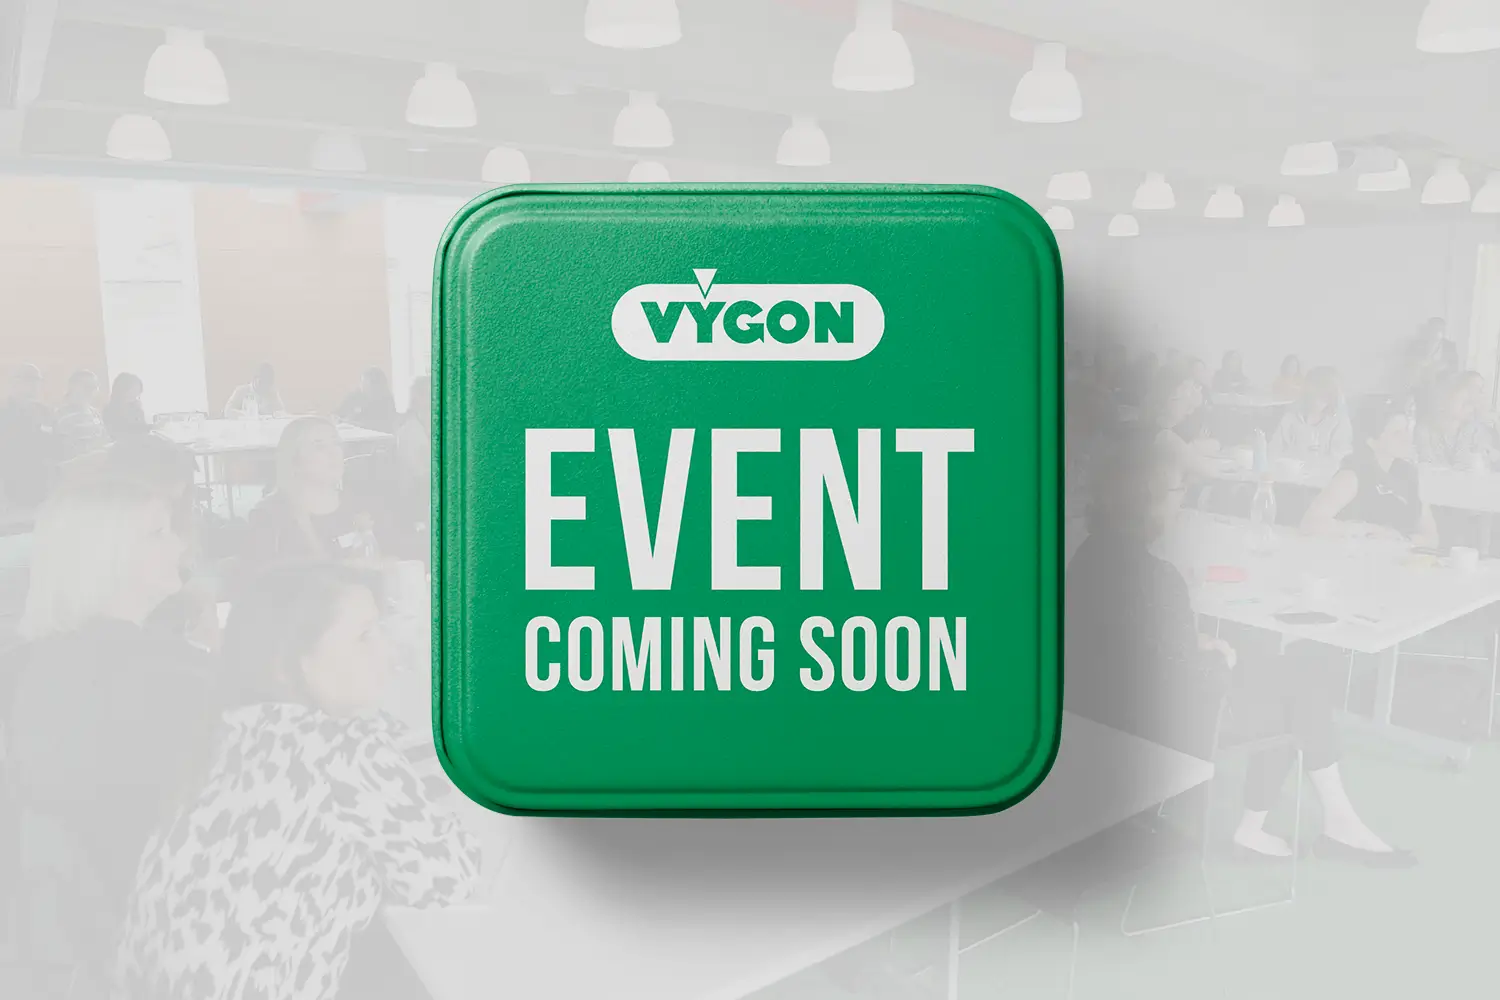 Vygon event coming soon